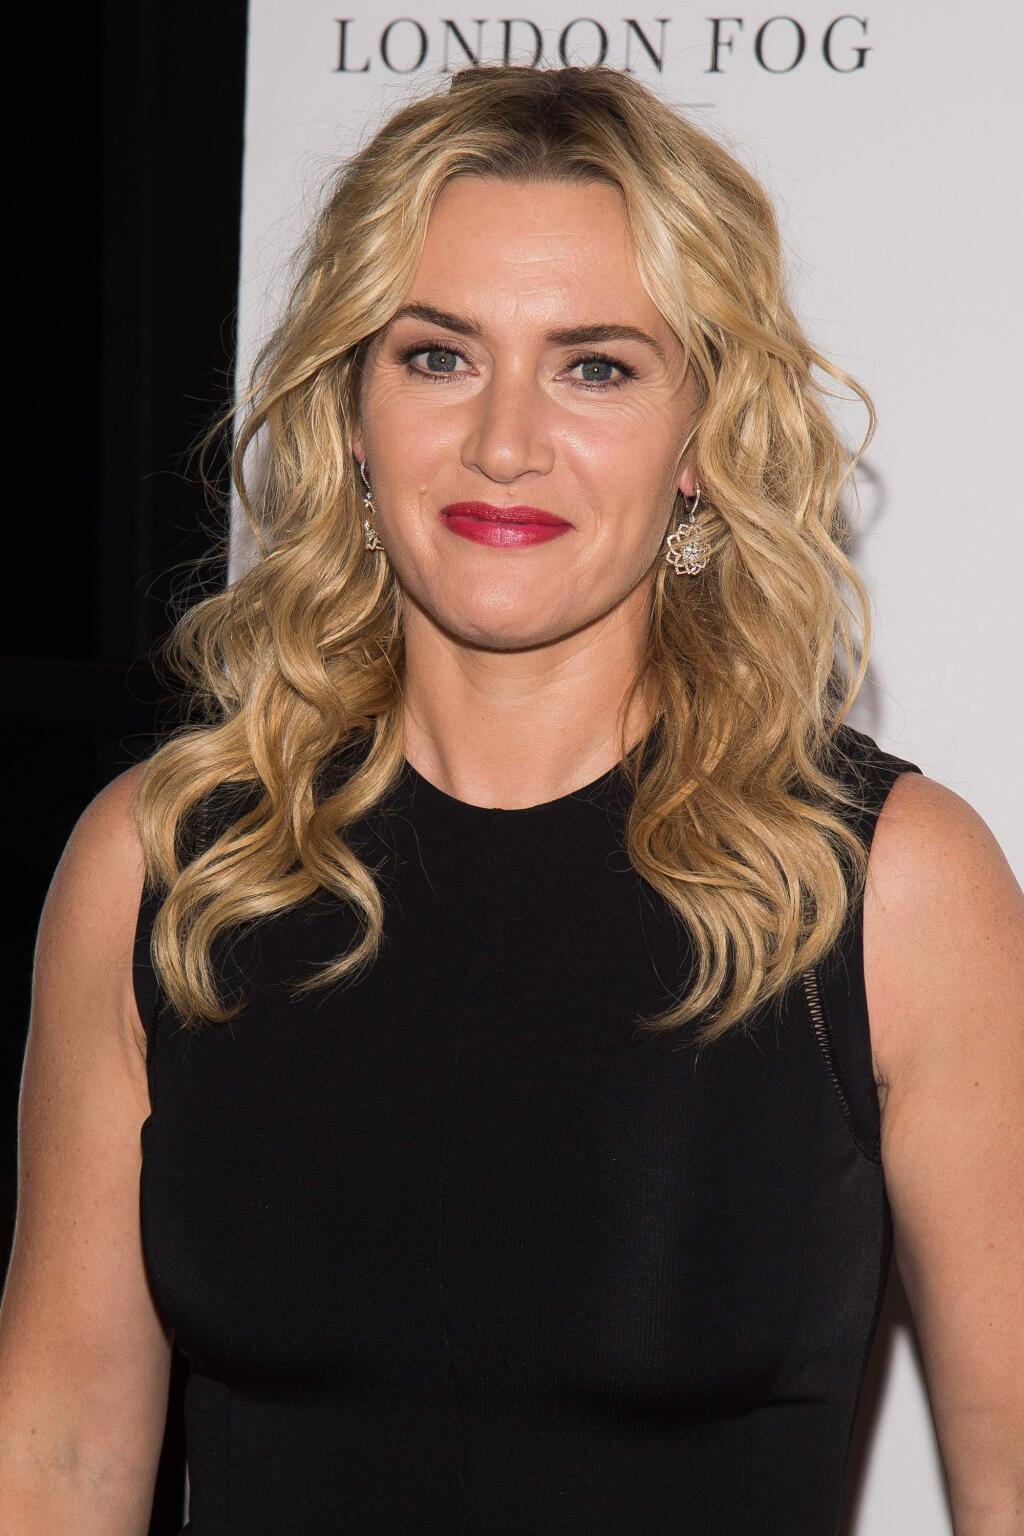 Kate Winslet attends a screening of 'The Dressmaker' at Florence Gould Hall Theater on Friday, Sept. 16, 2016, in New York. (Photo by Charles Sykes/Invision/AP)